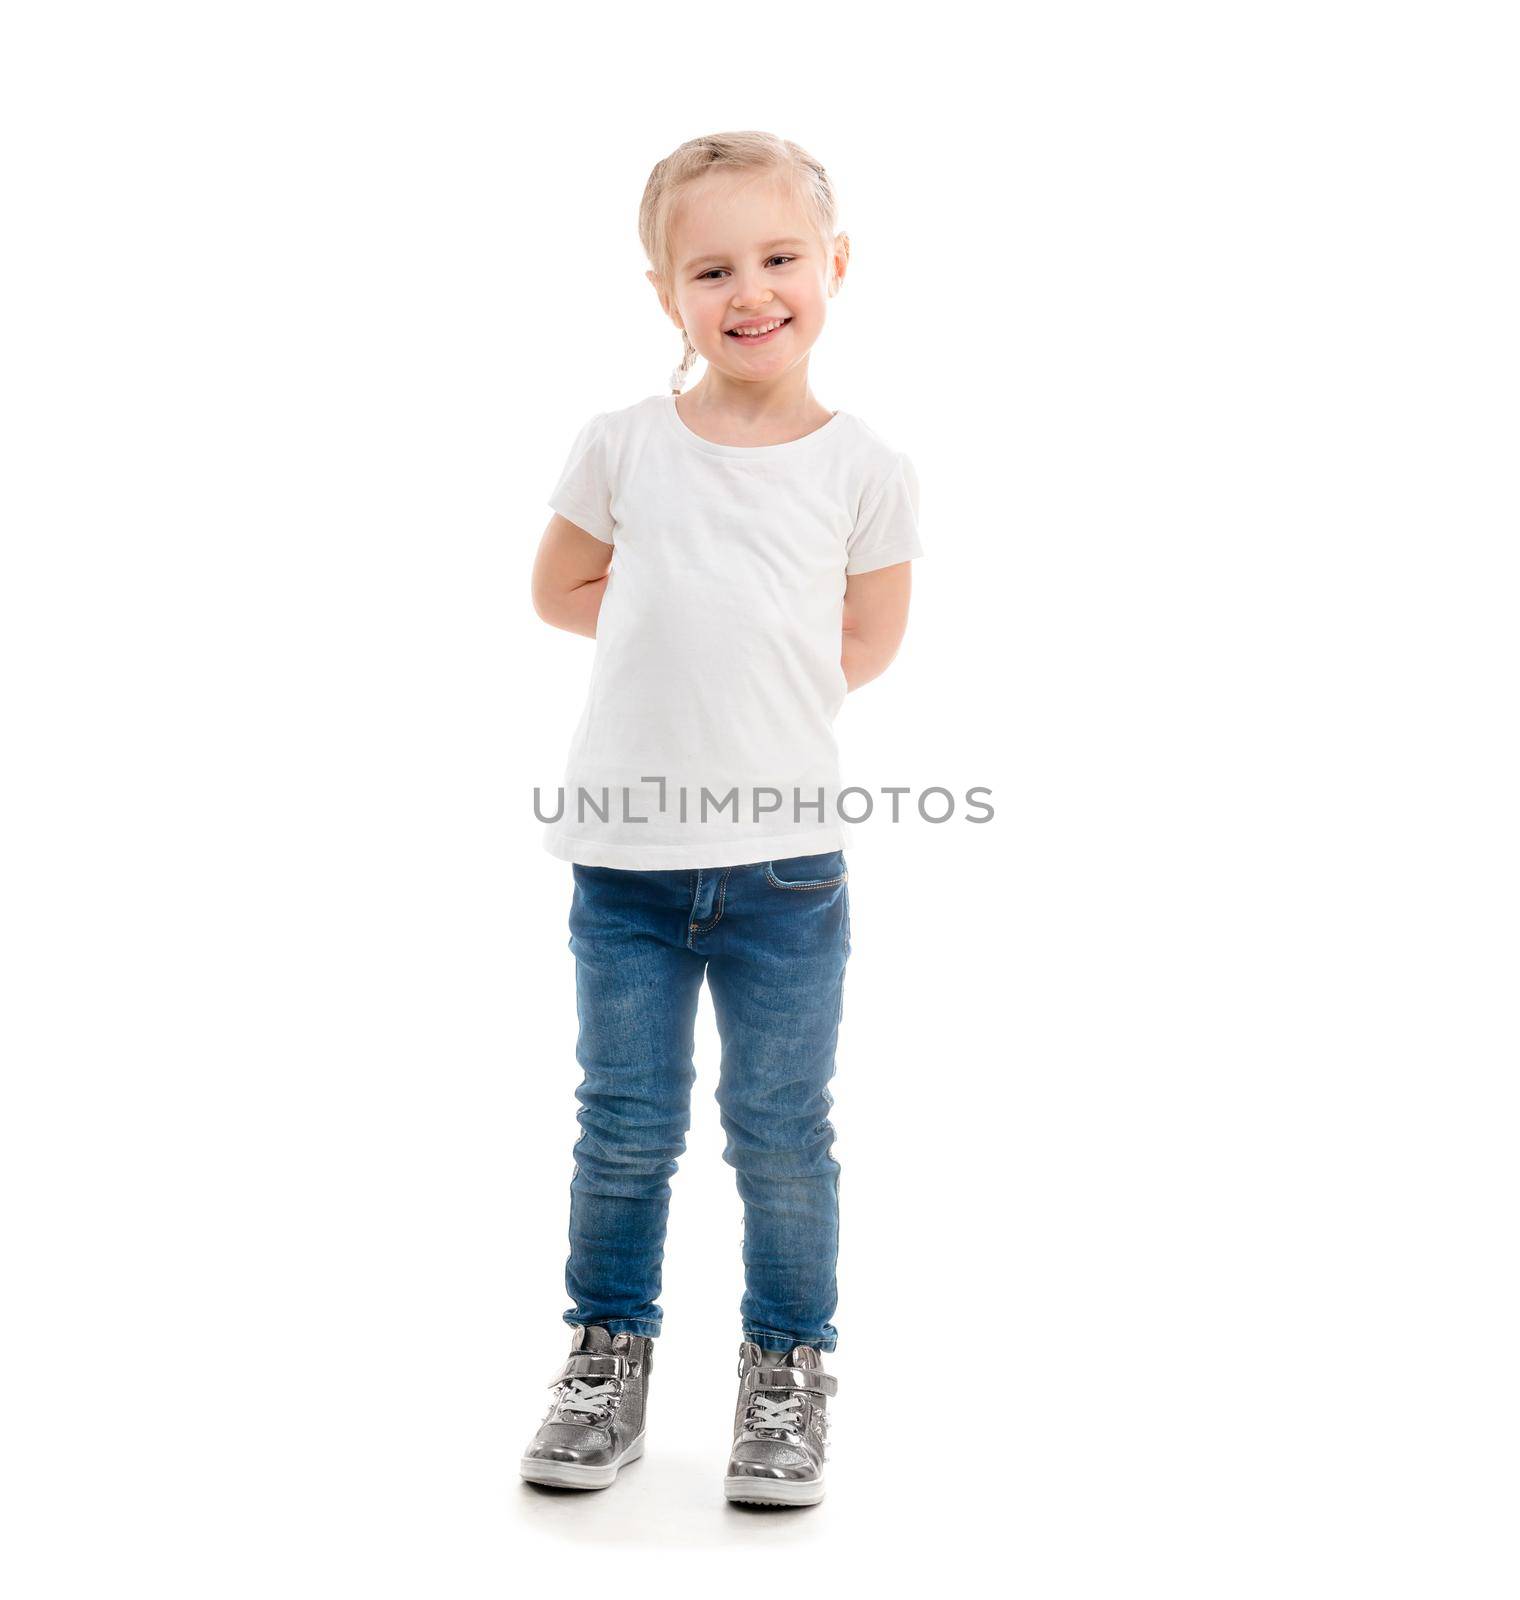 girl in t-shirt standing isolated on white background by tan4ikk1